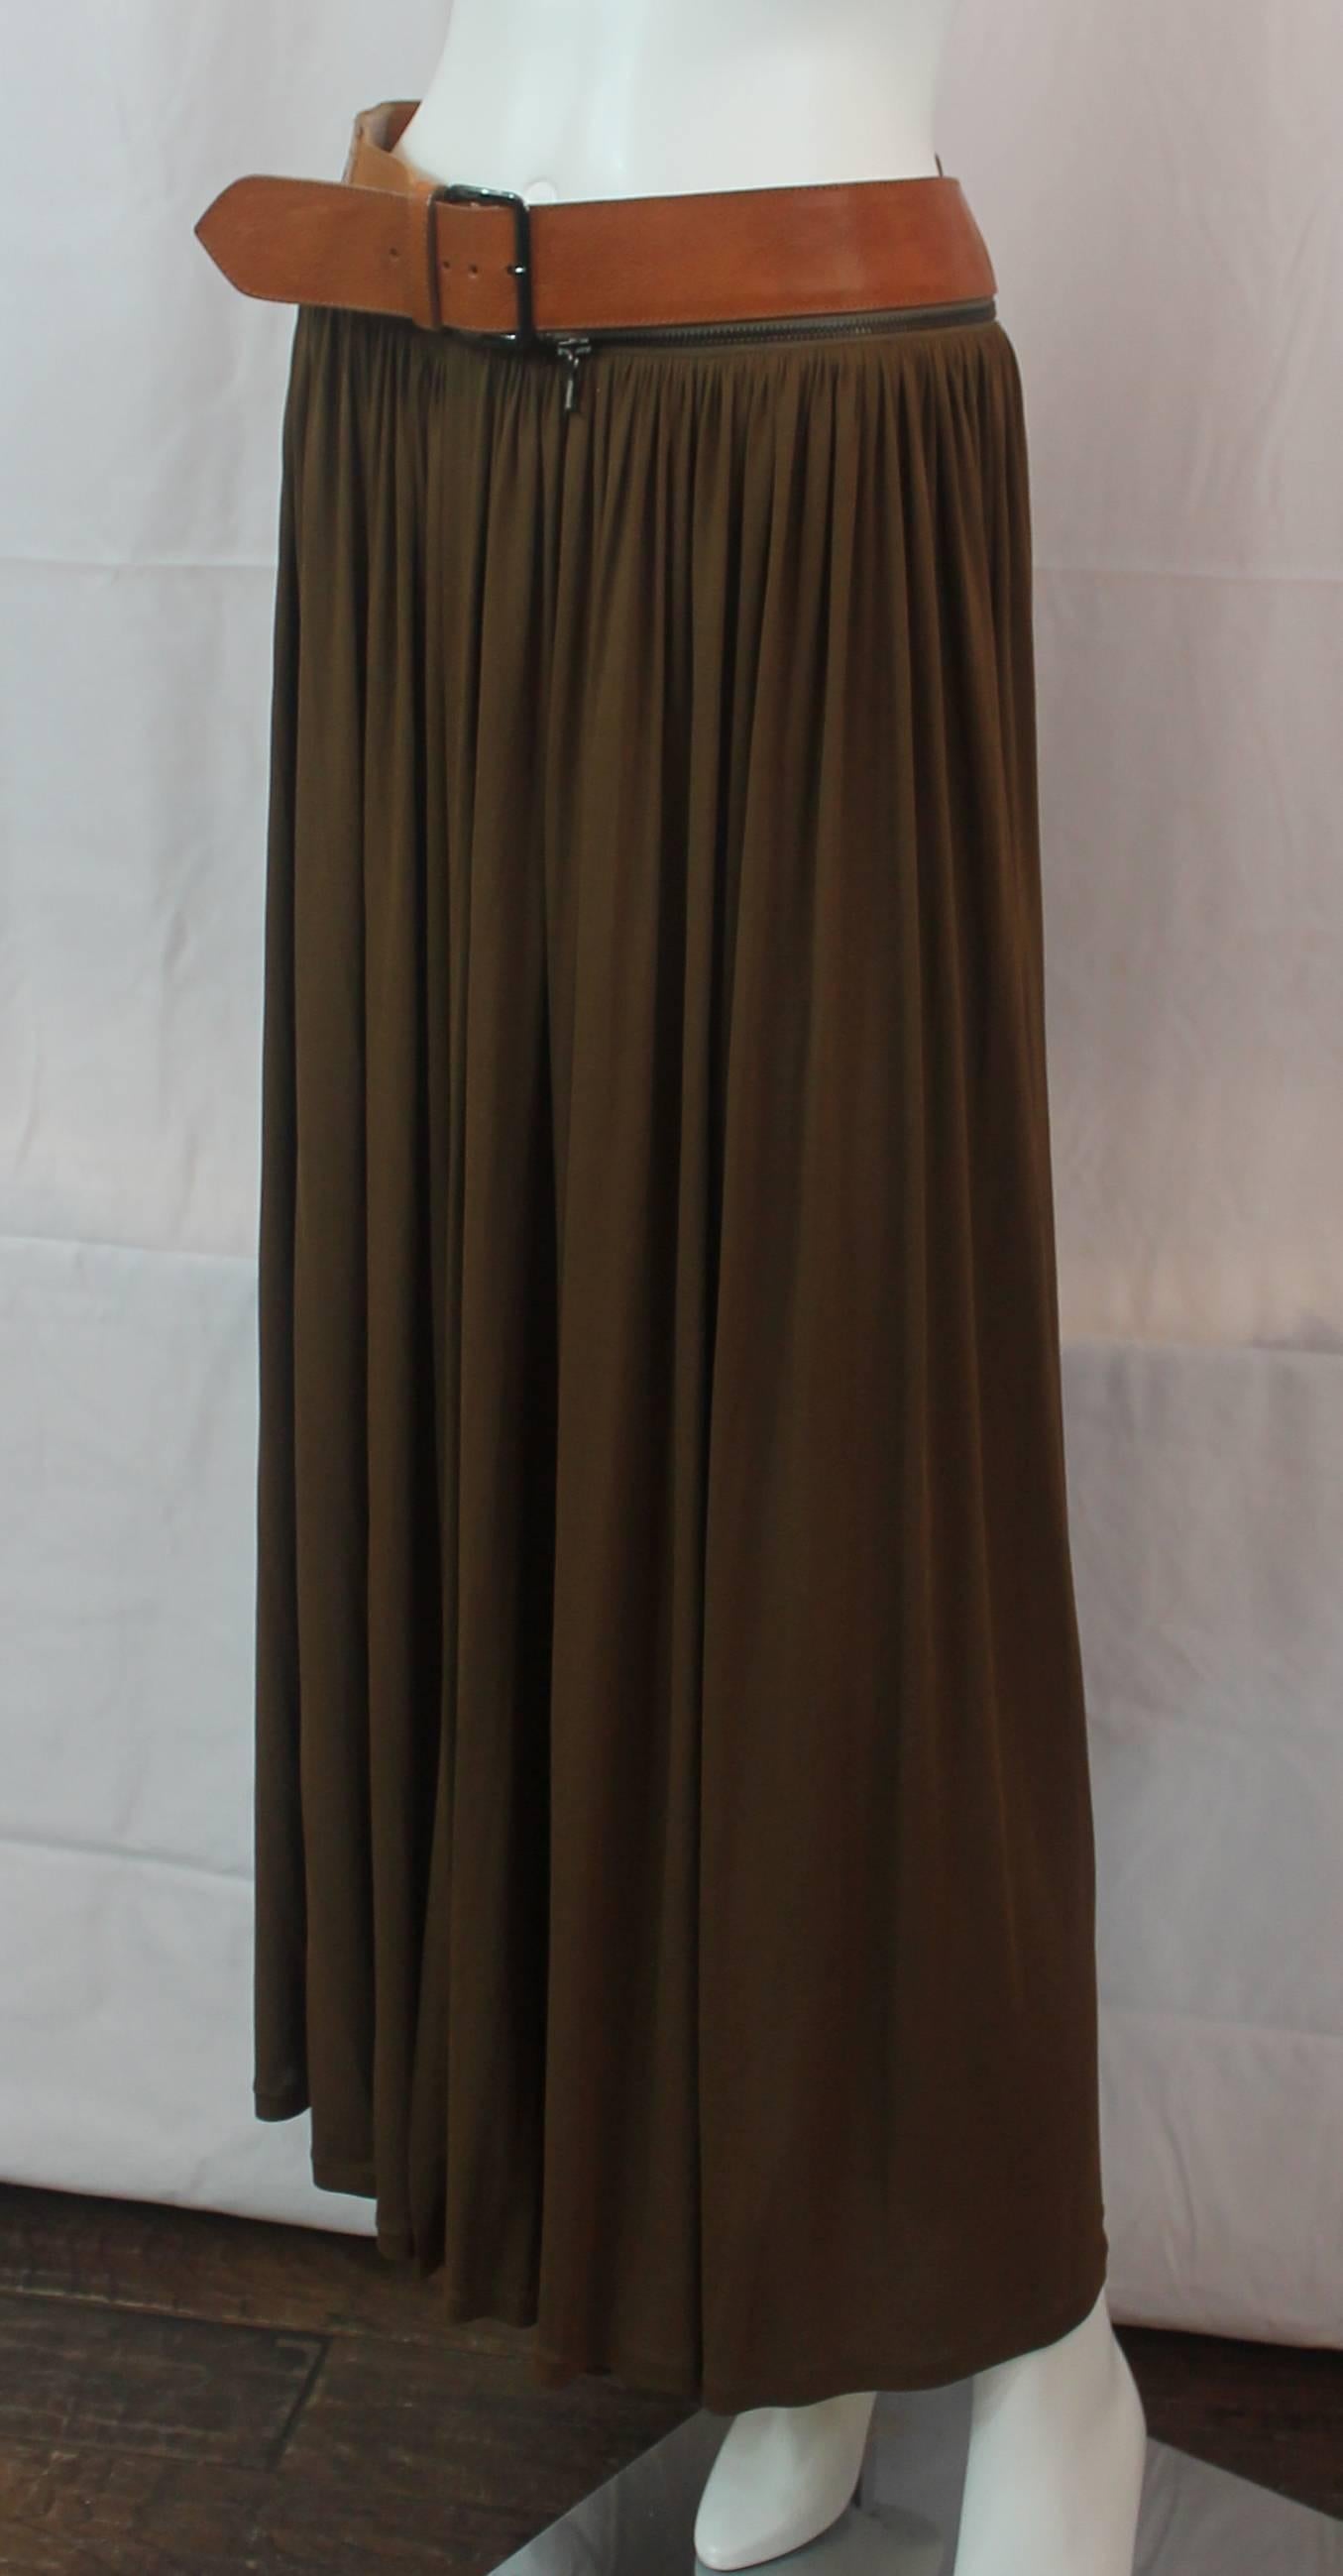 Jean Paul Gaultier Brown Jersey Maxi Wrap Skirt with Luggage Leather Belt - 8. This maxi wrap skirt is a brown jersey material and has a luggage leather belt at the waist. The belt has a zipper attached to it, making it removable.The skirt is in